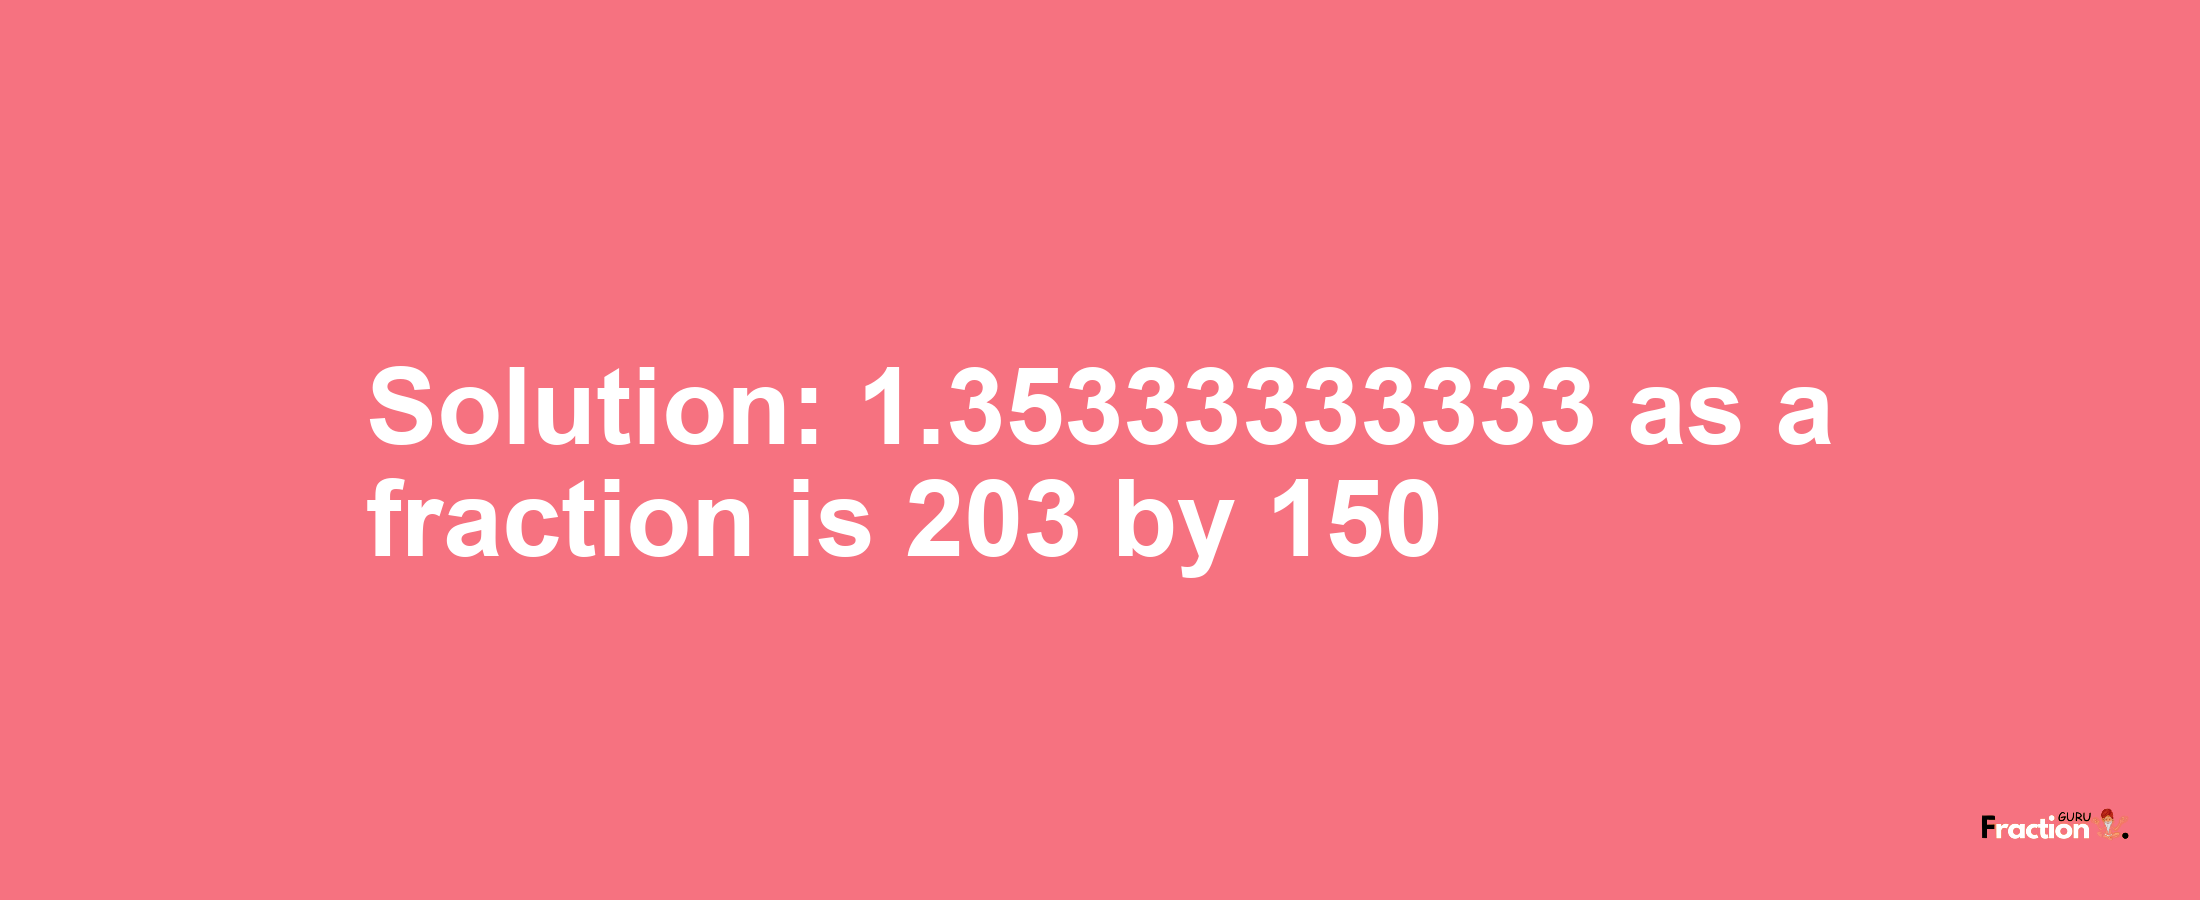 Solution:1.35333333333 as a fraction is 203/150